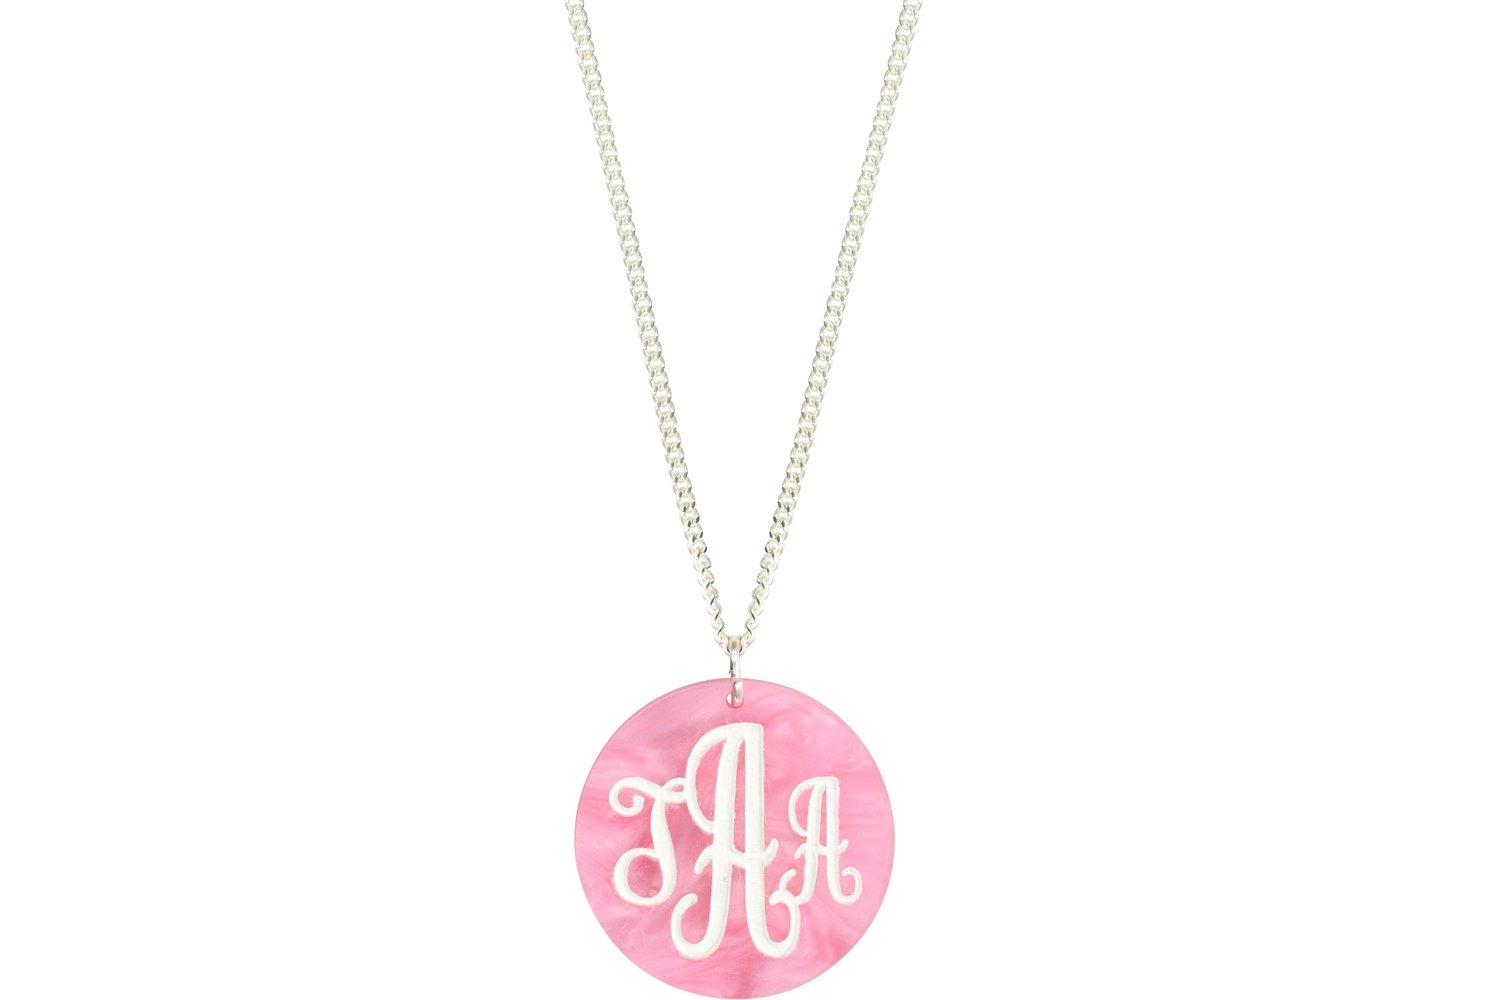 Traditional Monogram with Chain Necklace